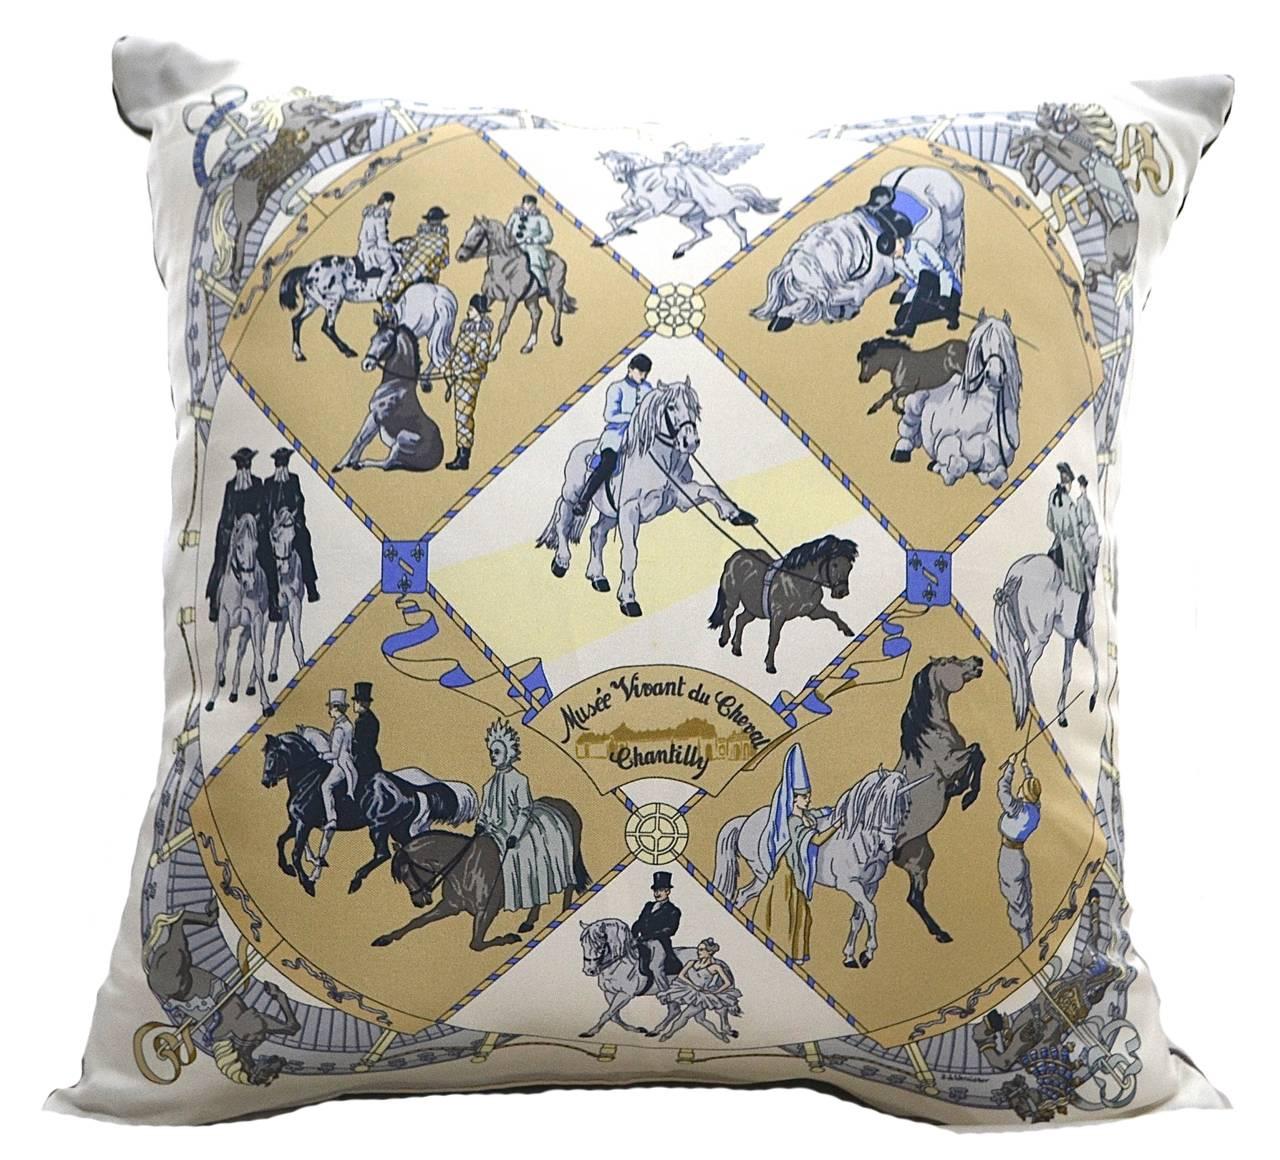 Made exclusively for iwatchjapan by Rita-Mari Couture. This elegant Hermes scarf pillow uses the highest quality items. This piece is entirely made in Japan and manufactured in an artisanal way, in which every step of the process is carefully